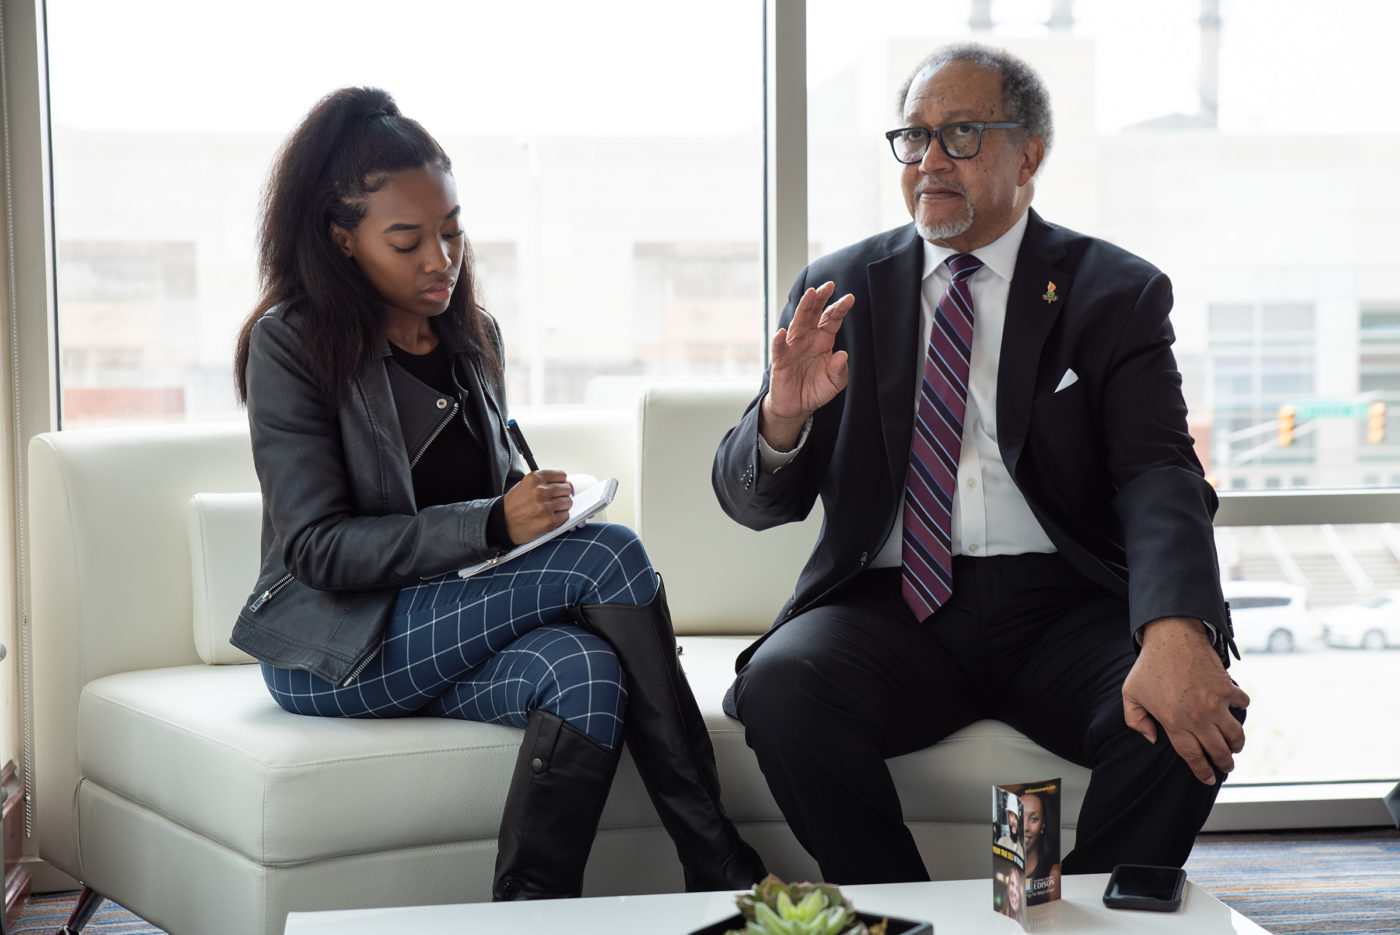 Chavis, who has a background in chemistry, said that he thinks the educational system doesn’t prepare millennials of any race for the world of the future.